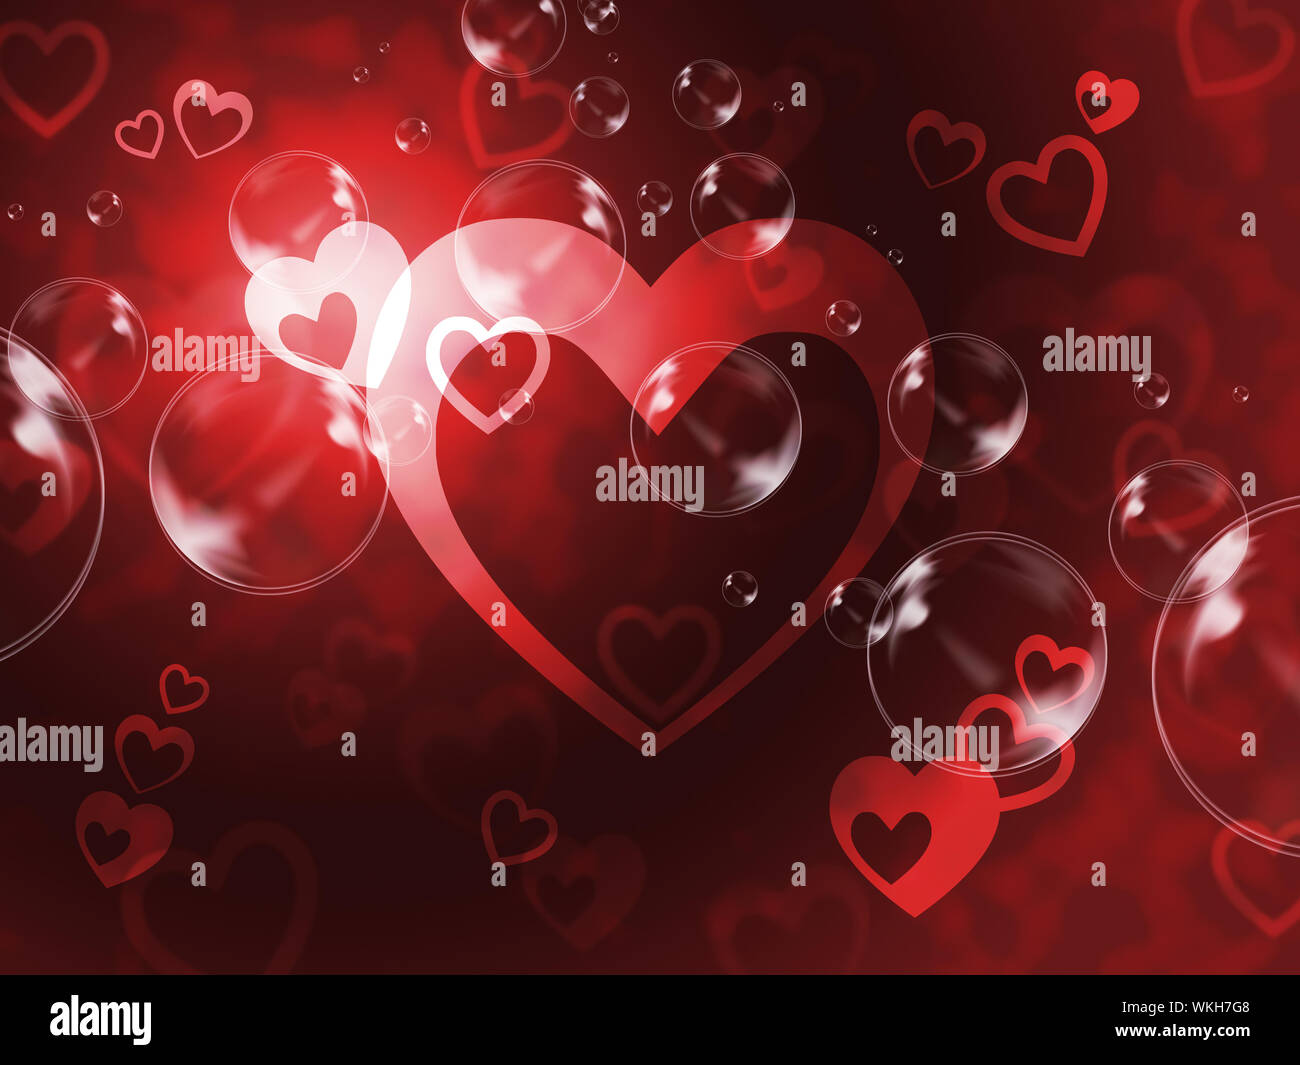 Hearts Background Meaning Passionate Wallpaper Or Loving Art Stock ...